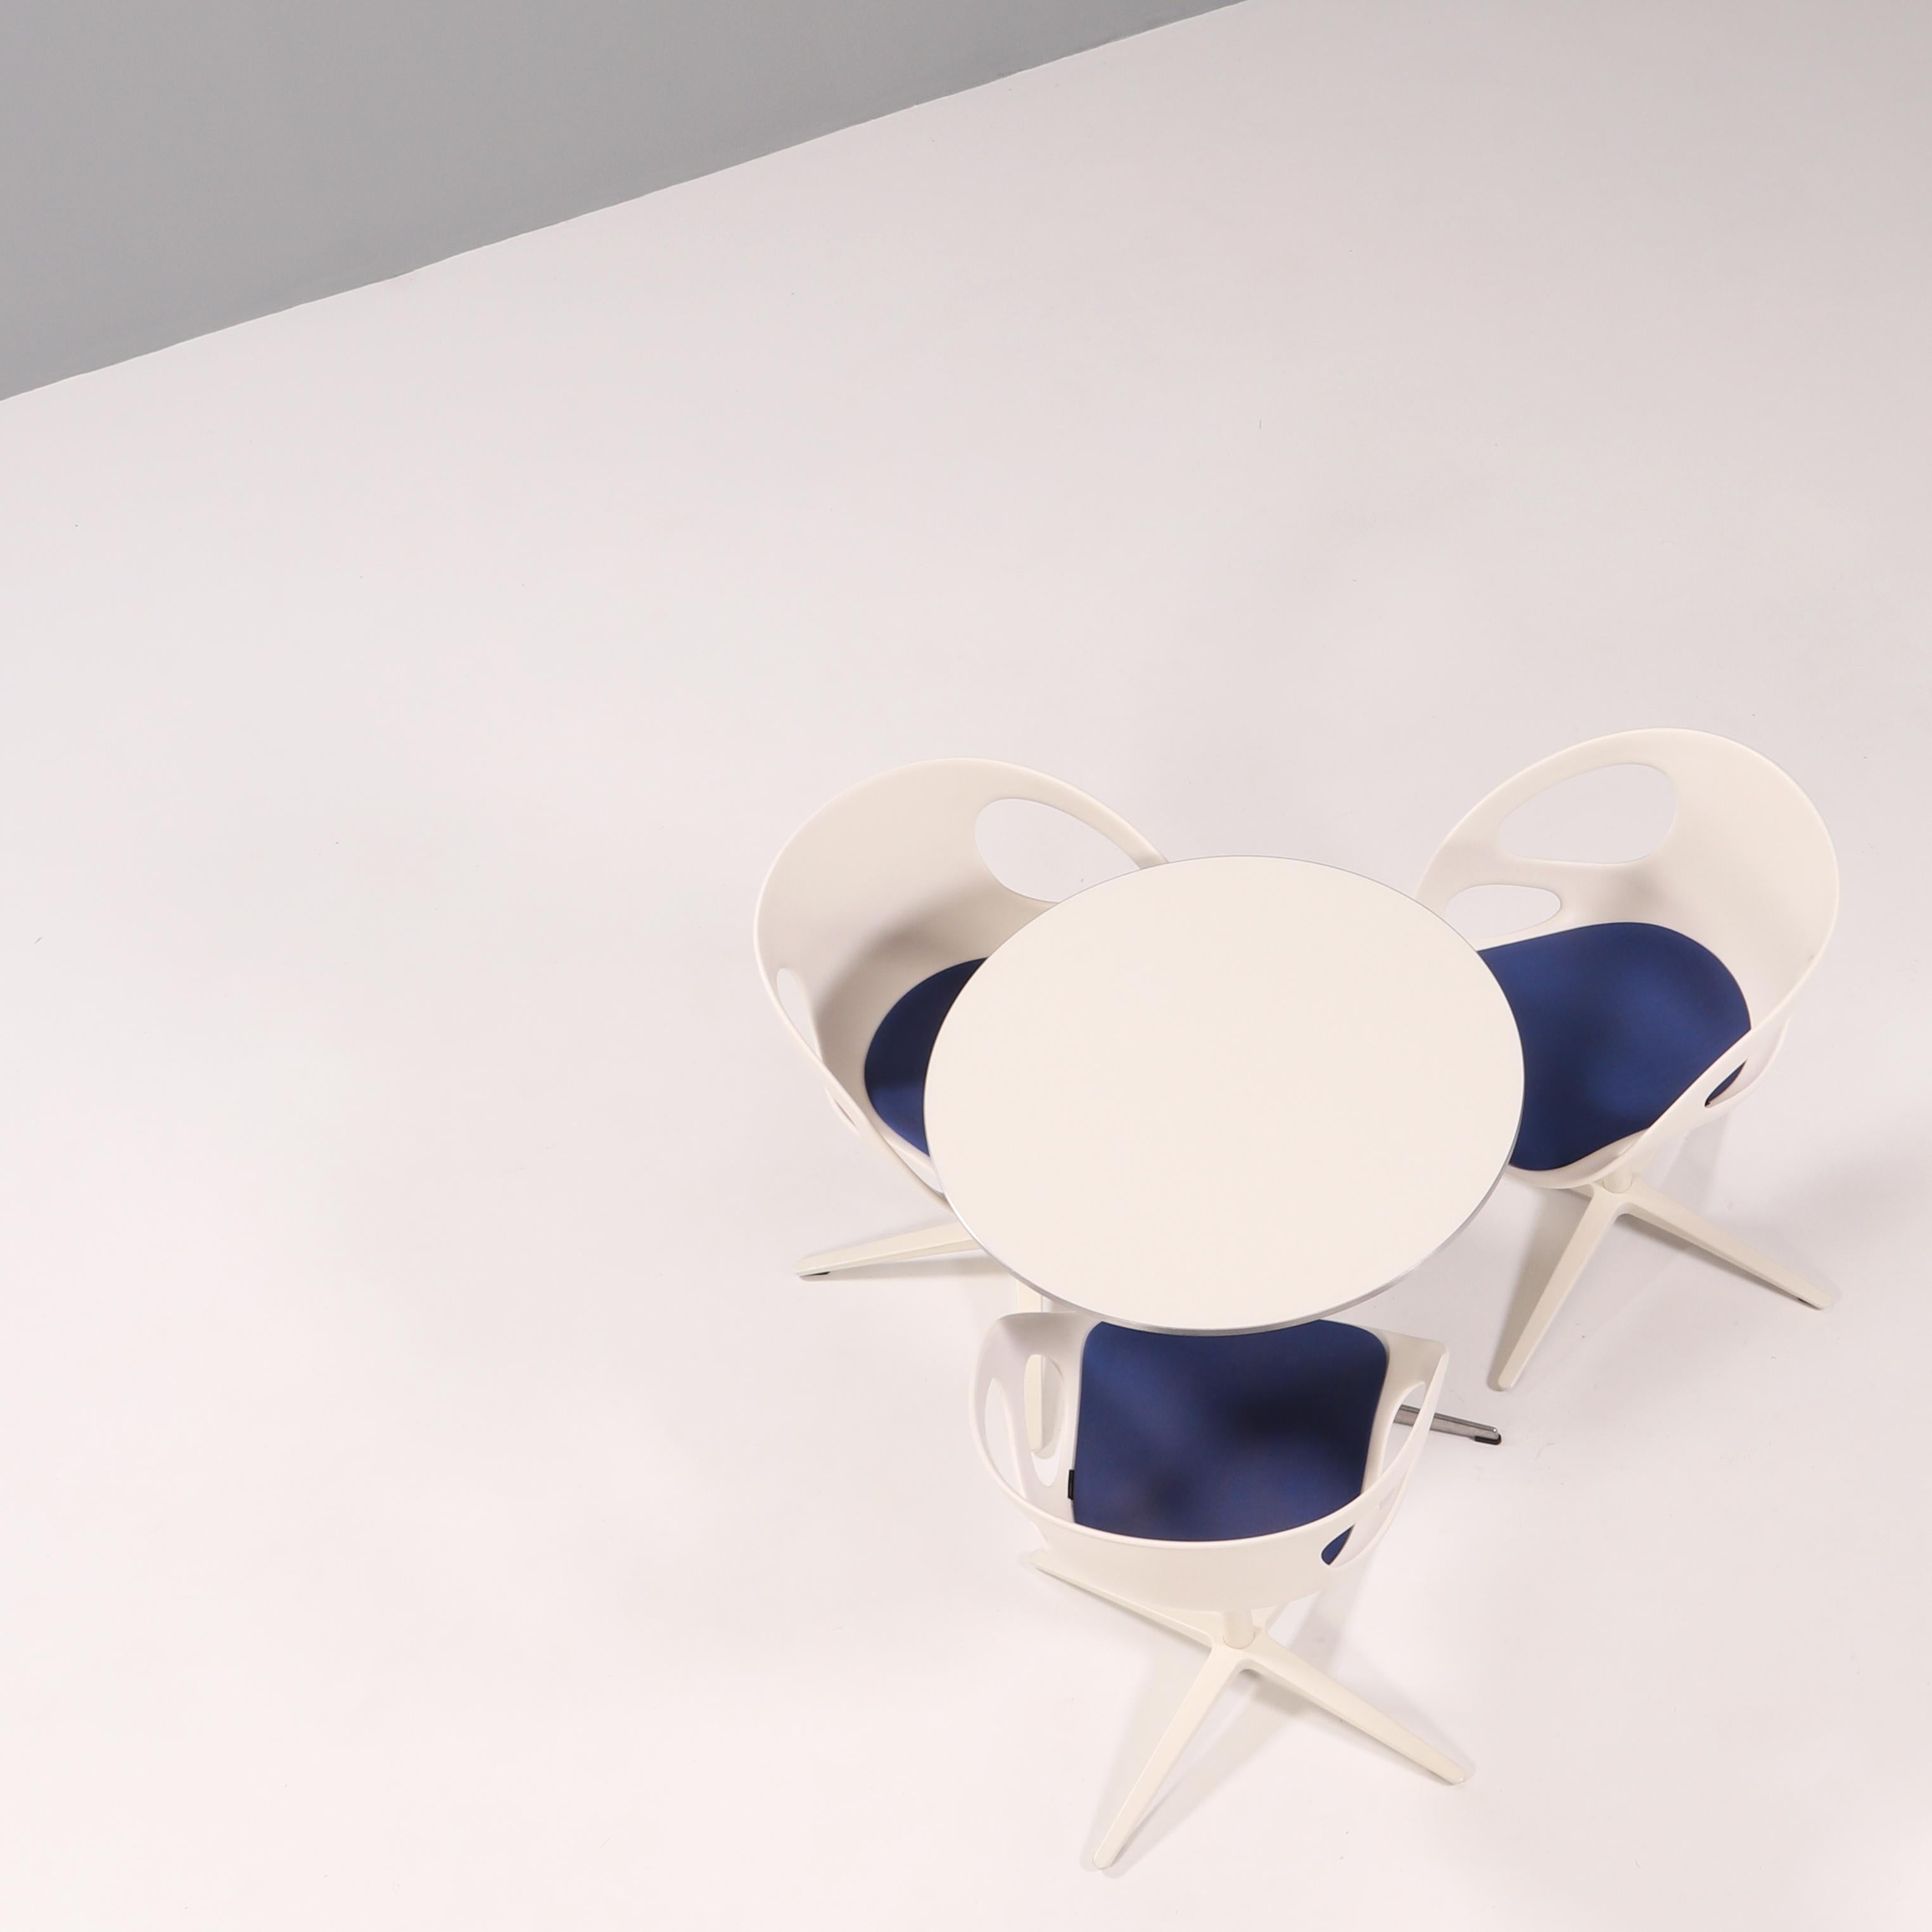 Table: 

Originally designed in 1968 by Piet Hein, Bruno Mathsson and Arne Jacobsen, the A622 table is manufactured by Fritz Hansen in Denmark.

The modern contemporary round table features a circular white laminate top with an aluminium edge,